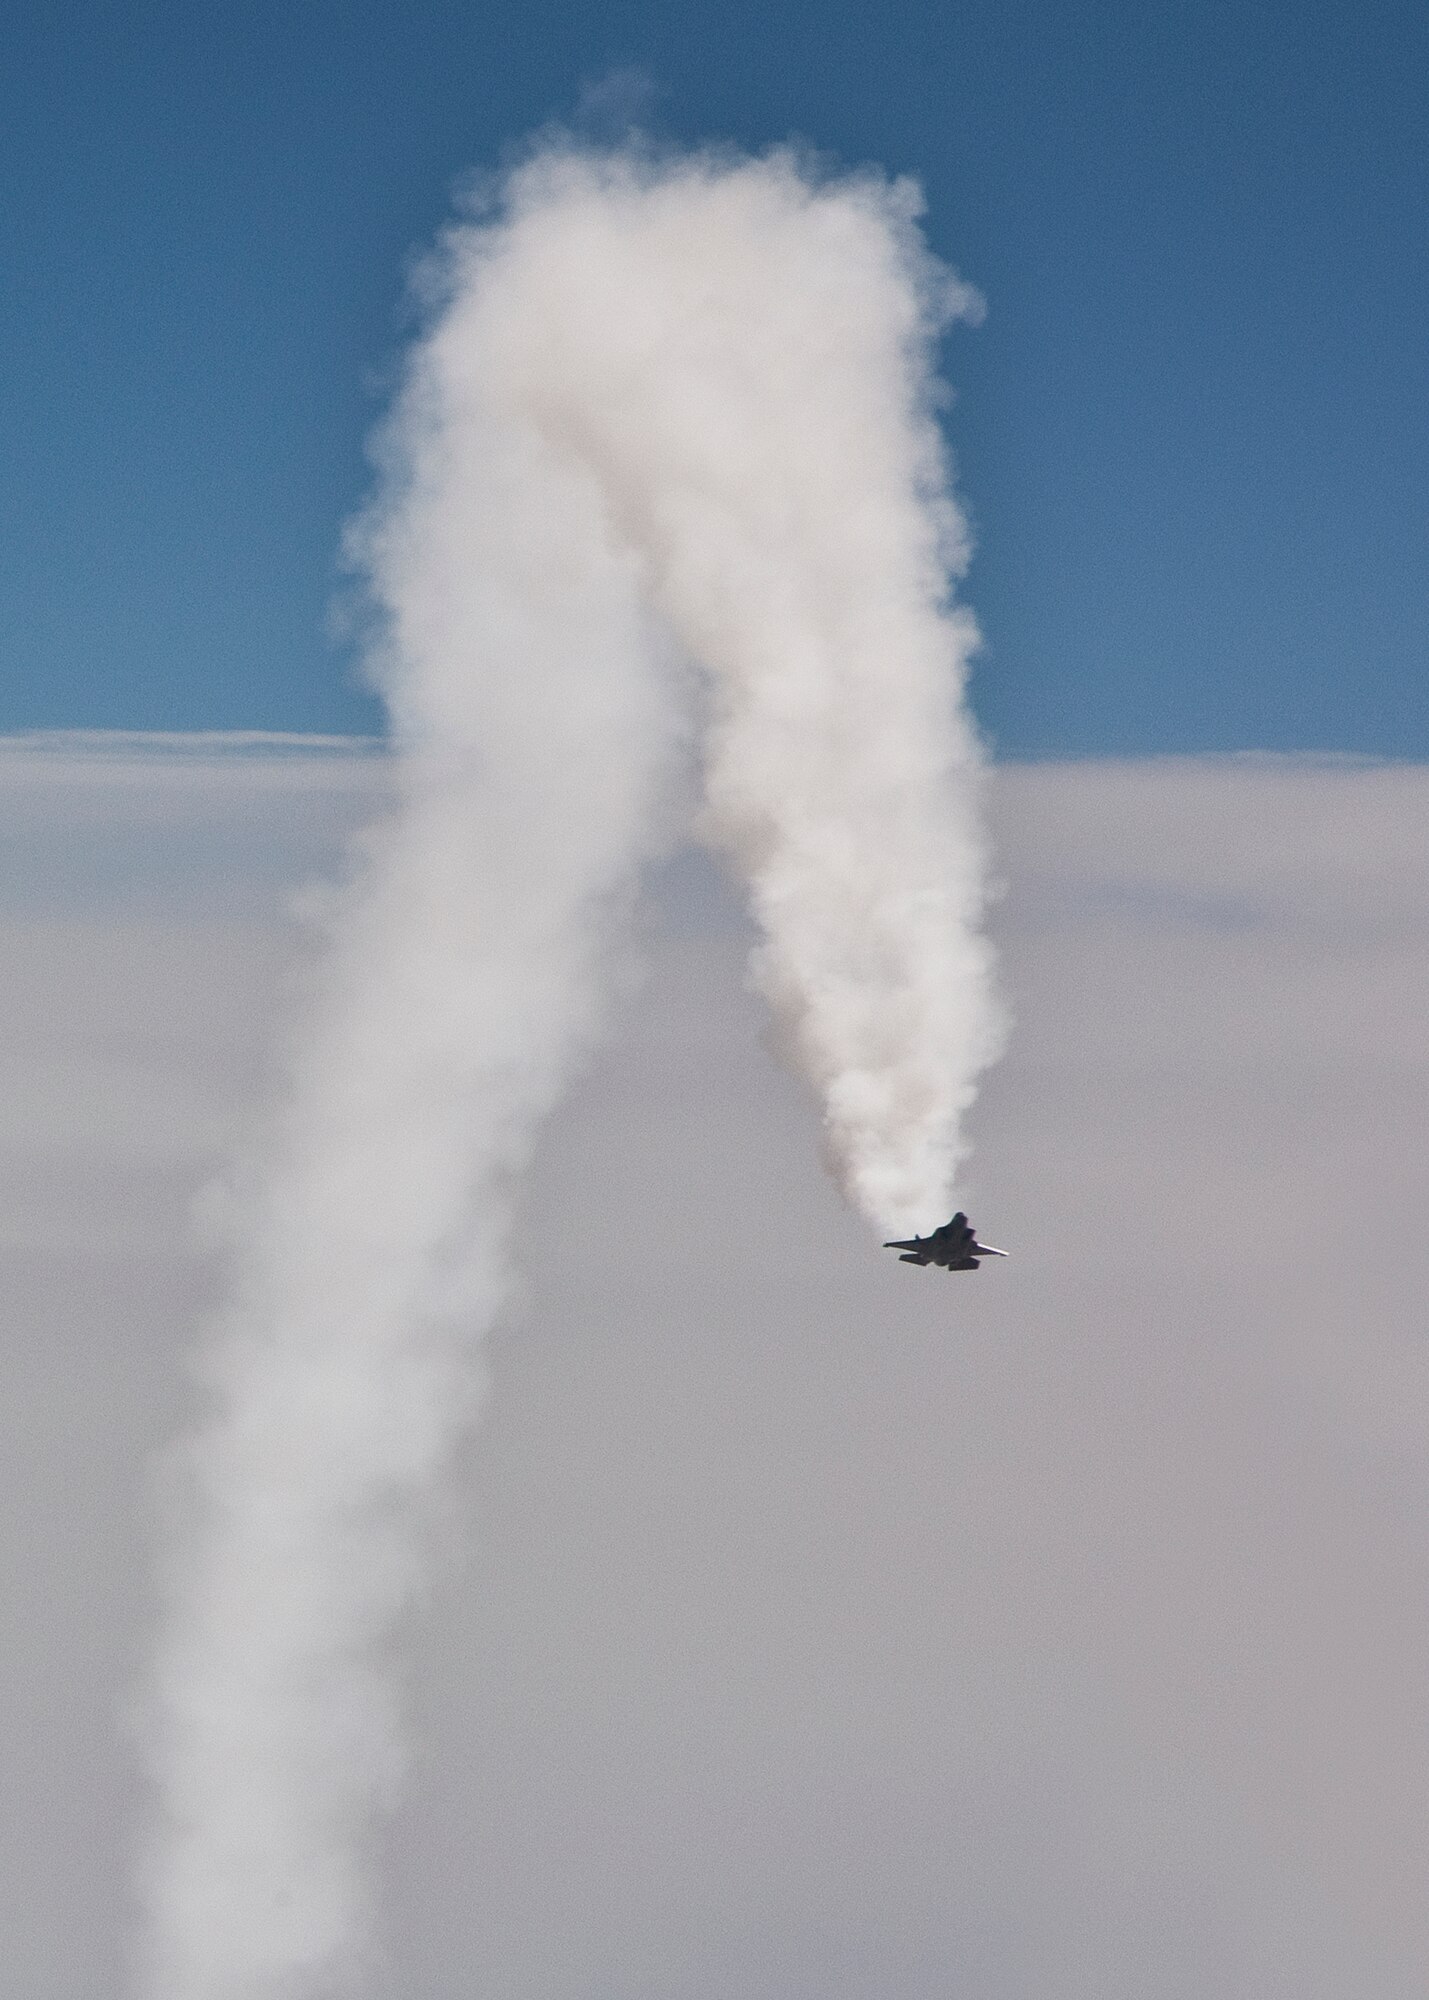 David Nelson, Lockheed Martin F-35 chief test pilot, flew AF-4 during High Angle of Attack testing Dec. 5, 2012, over Edwards Air Force Base, Calif. This was the first intentional departure of the F-35A. (Photo by Tom Reynolds/Lockheed Martin)